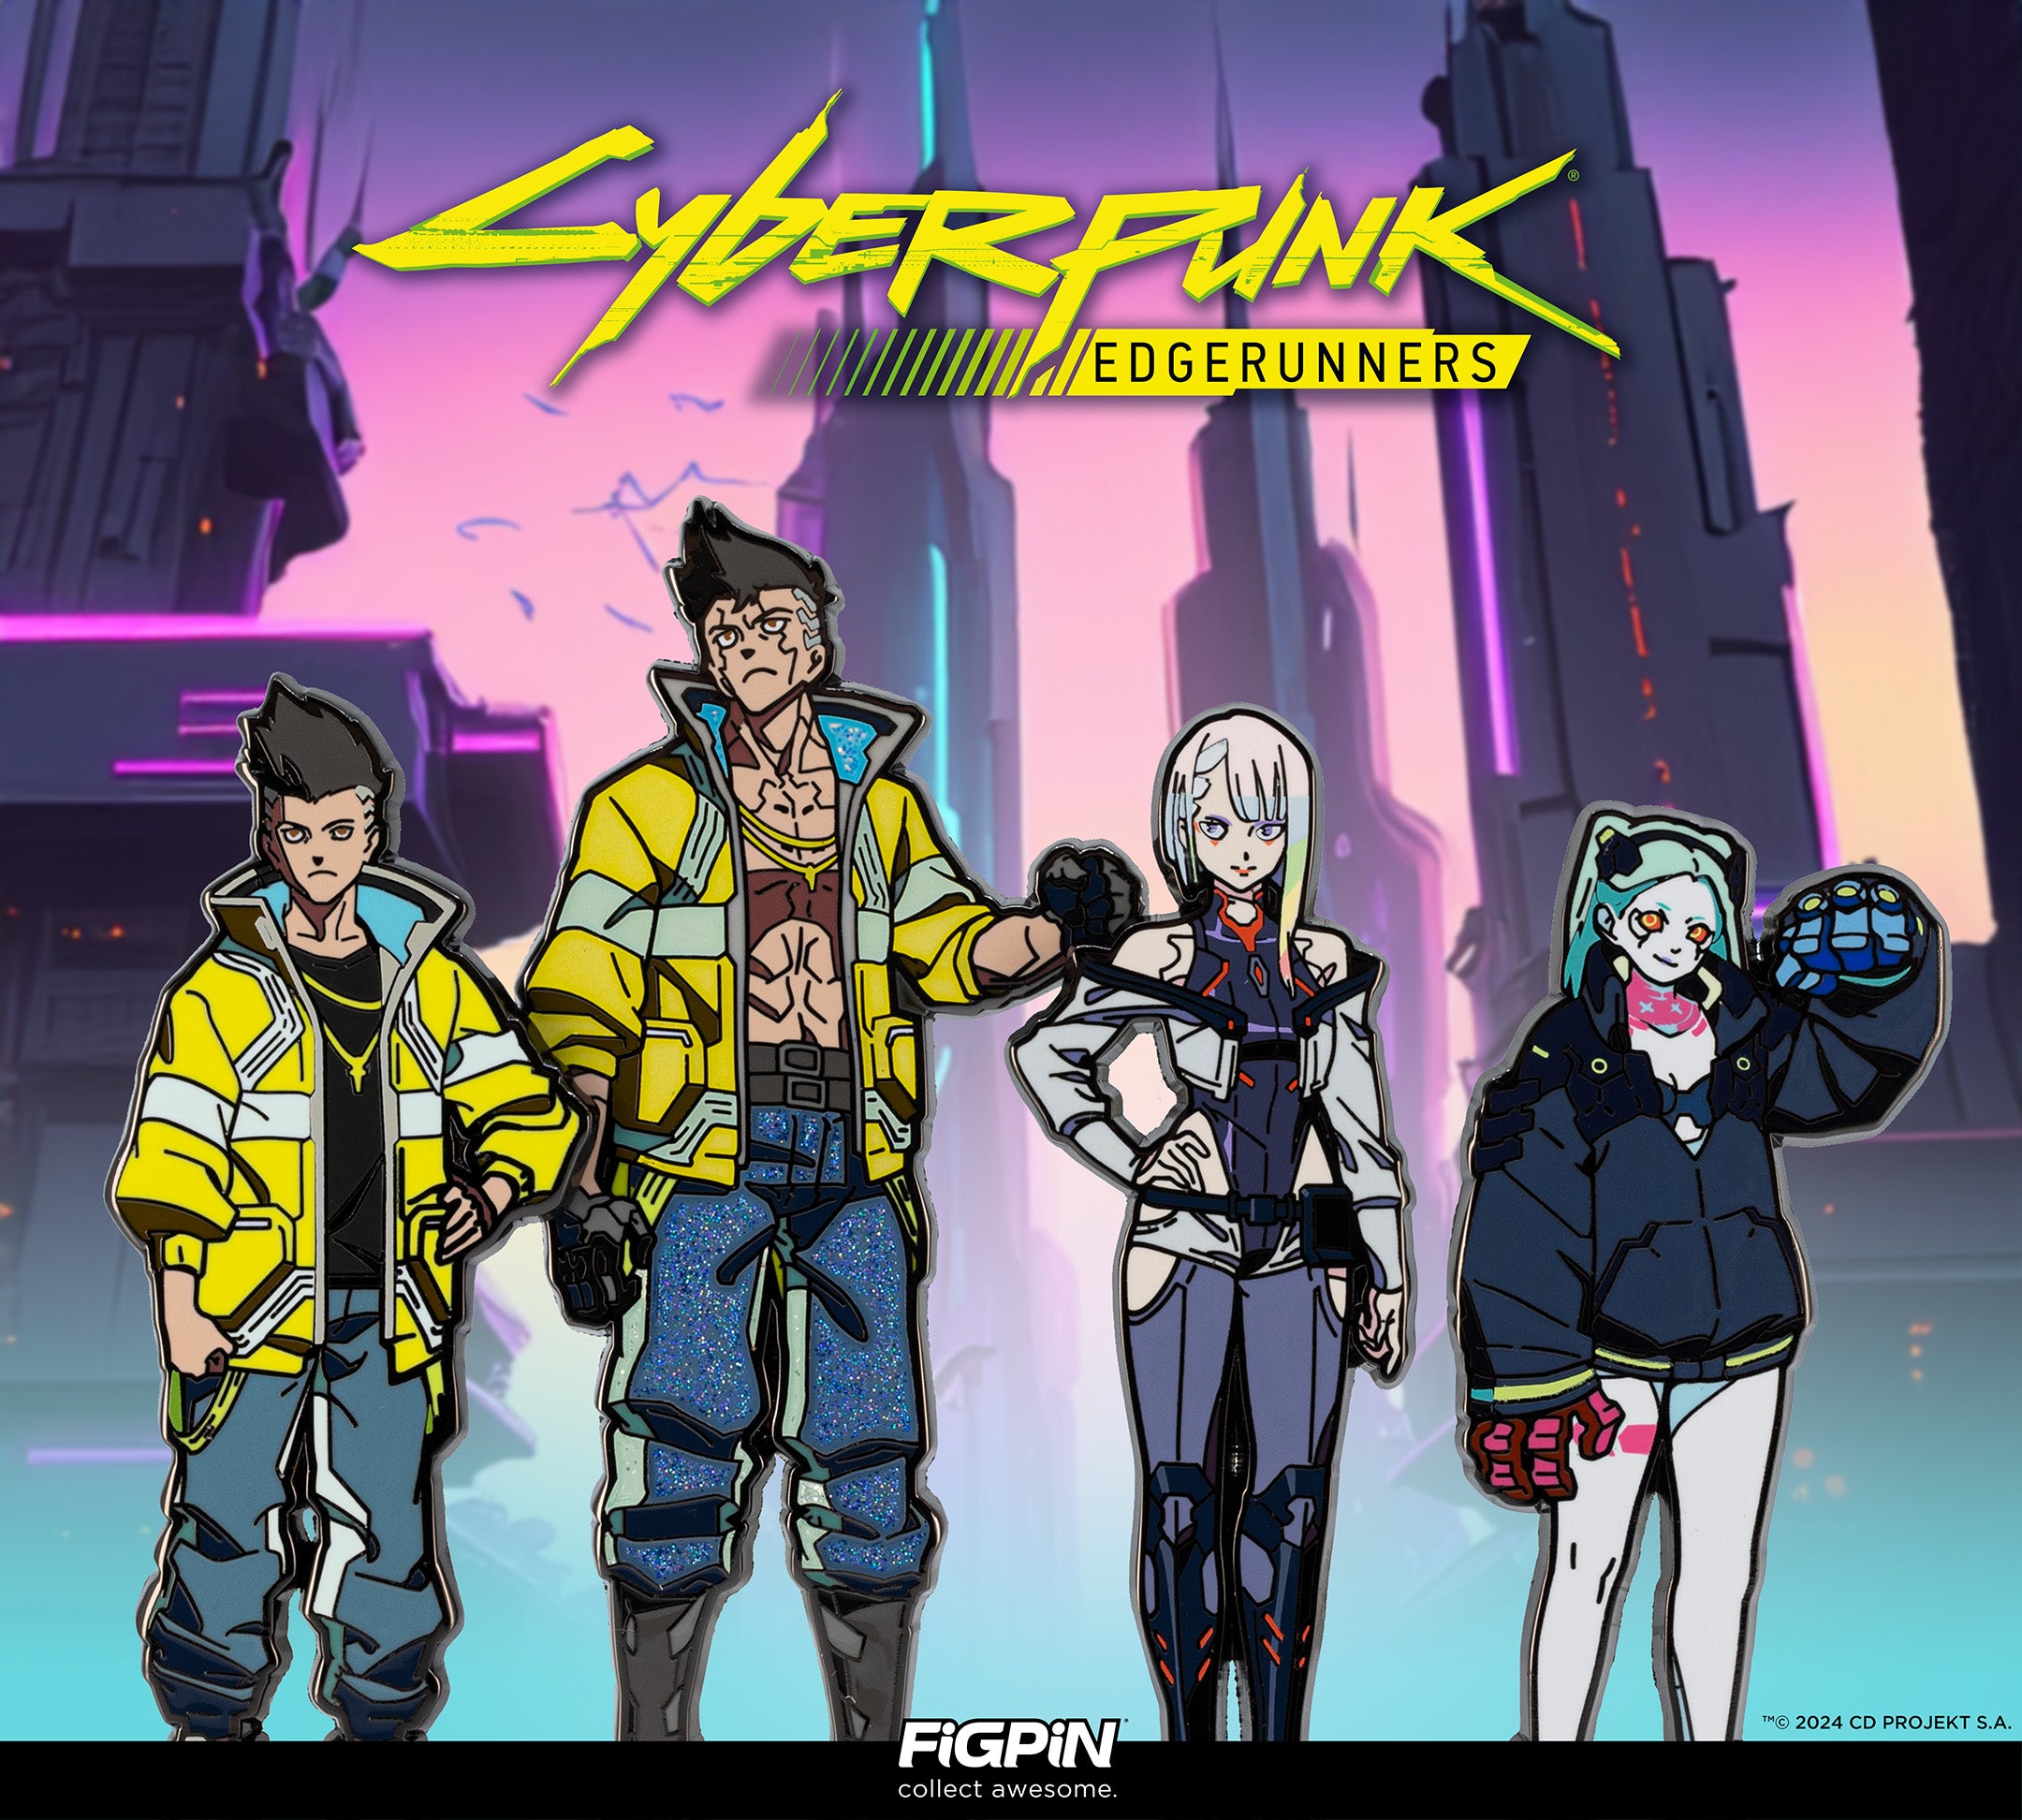 Photograph of CyberPunk Edgerunners characters available as enamel pins in this CyberPunk Edgerunners FiGPiN wave release